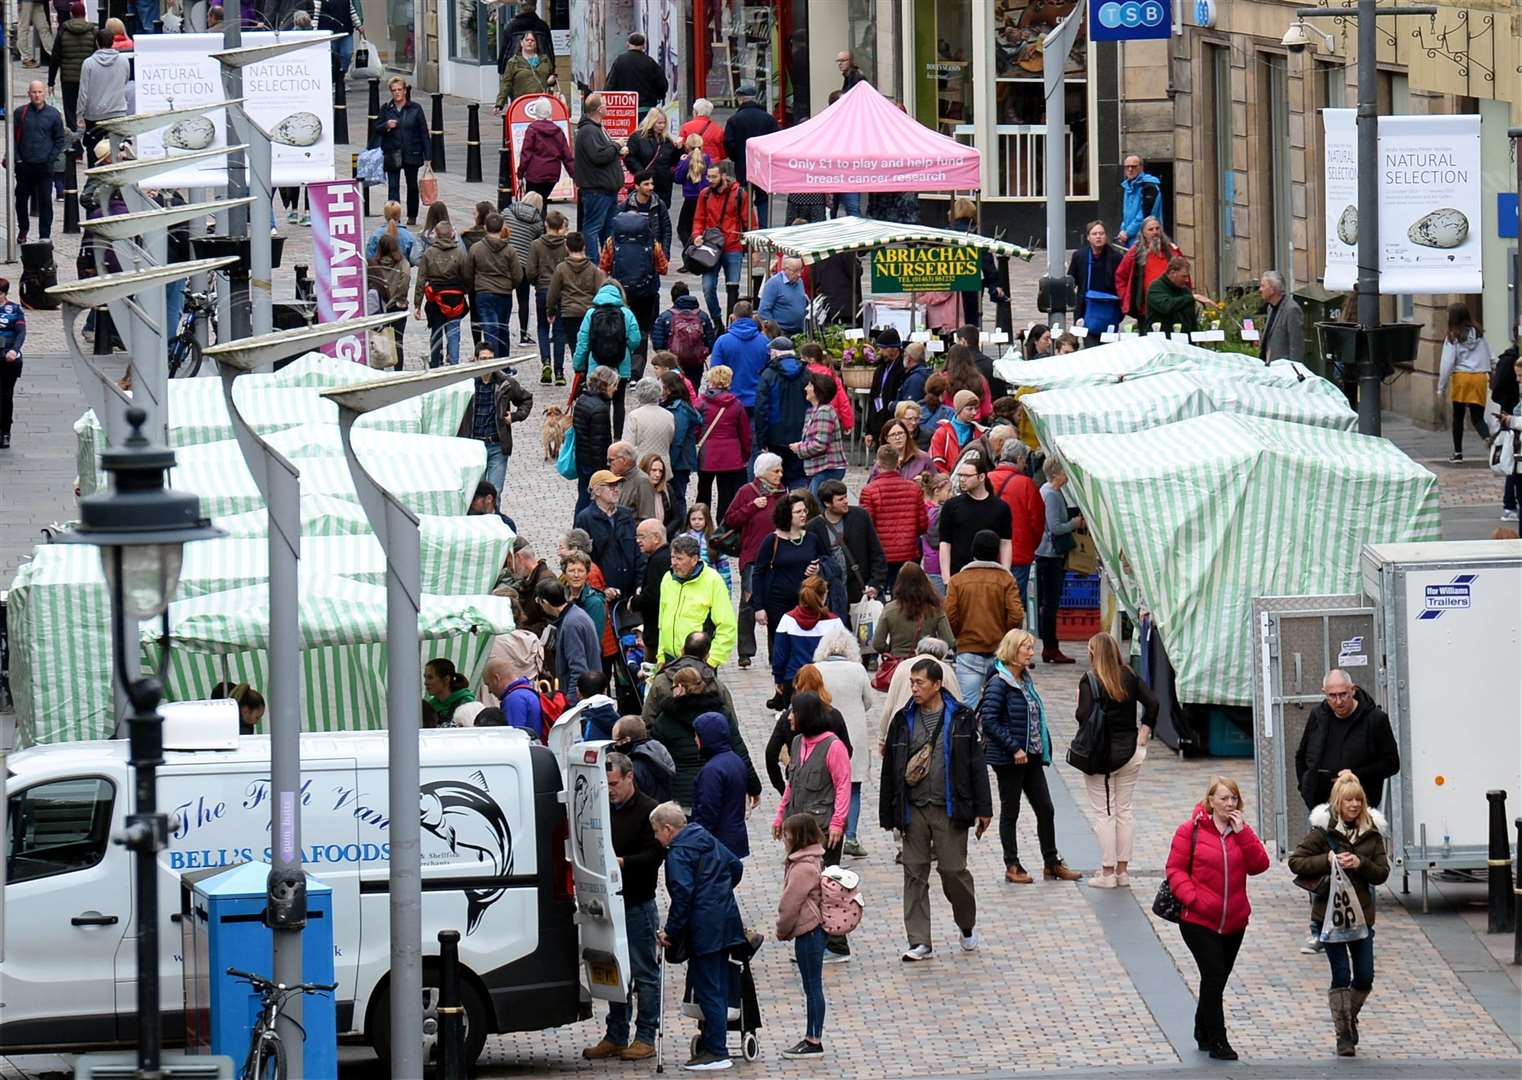 The Farmers Market is always a popular draw in Inverness High Street.